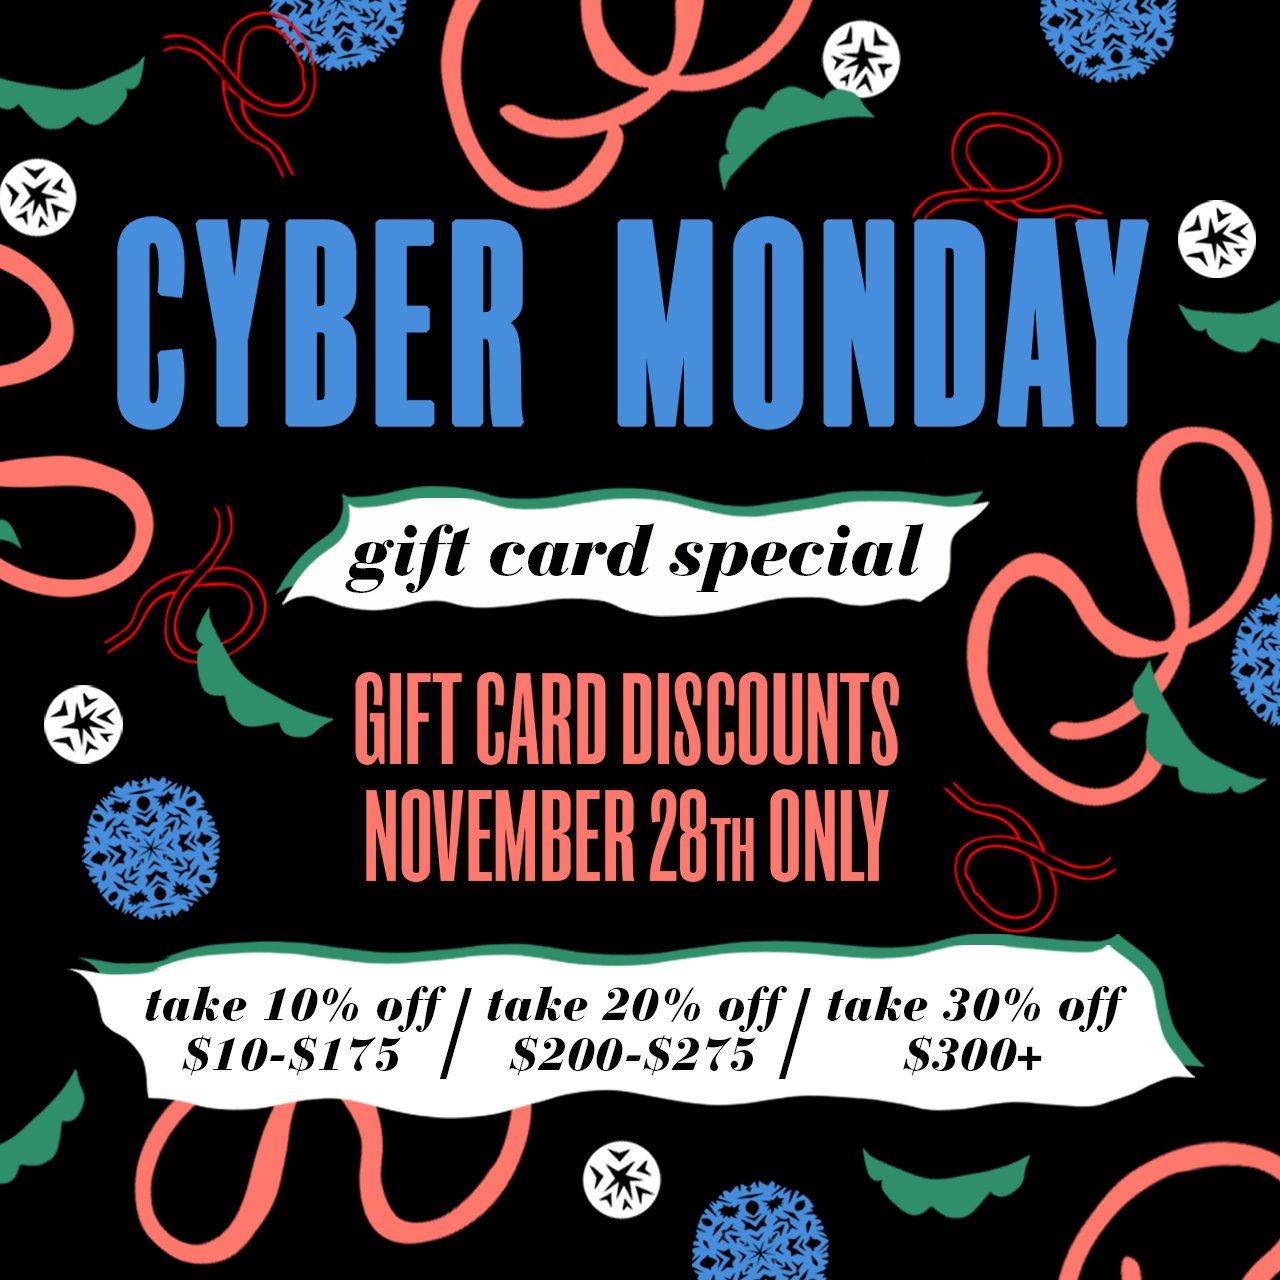 sale flyer: cyber monday gift card special gift card discounts november 28th only, take 10% off $10-$75 / take 20% off $200-$275/take 30% off $300+.